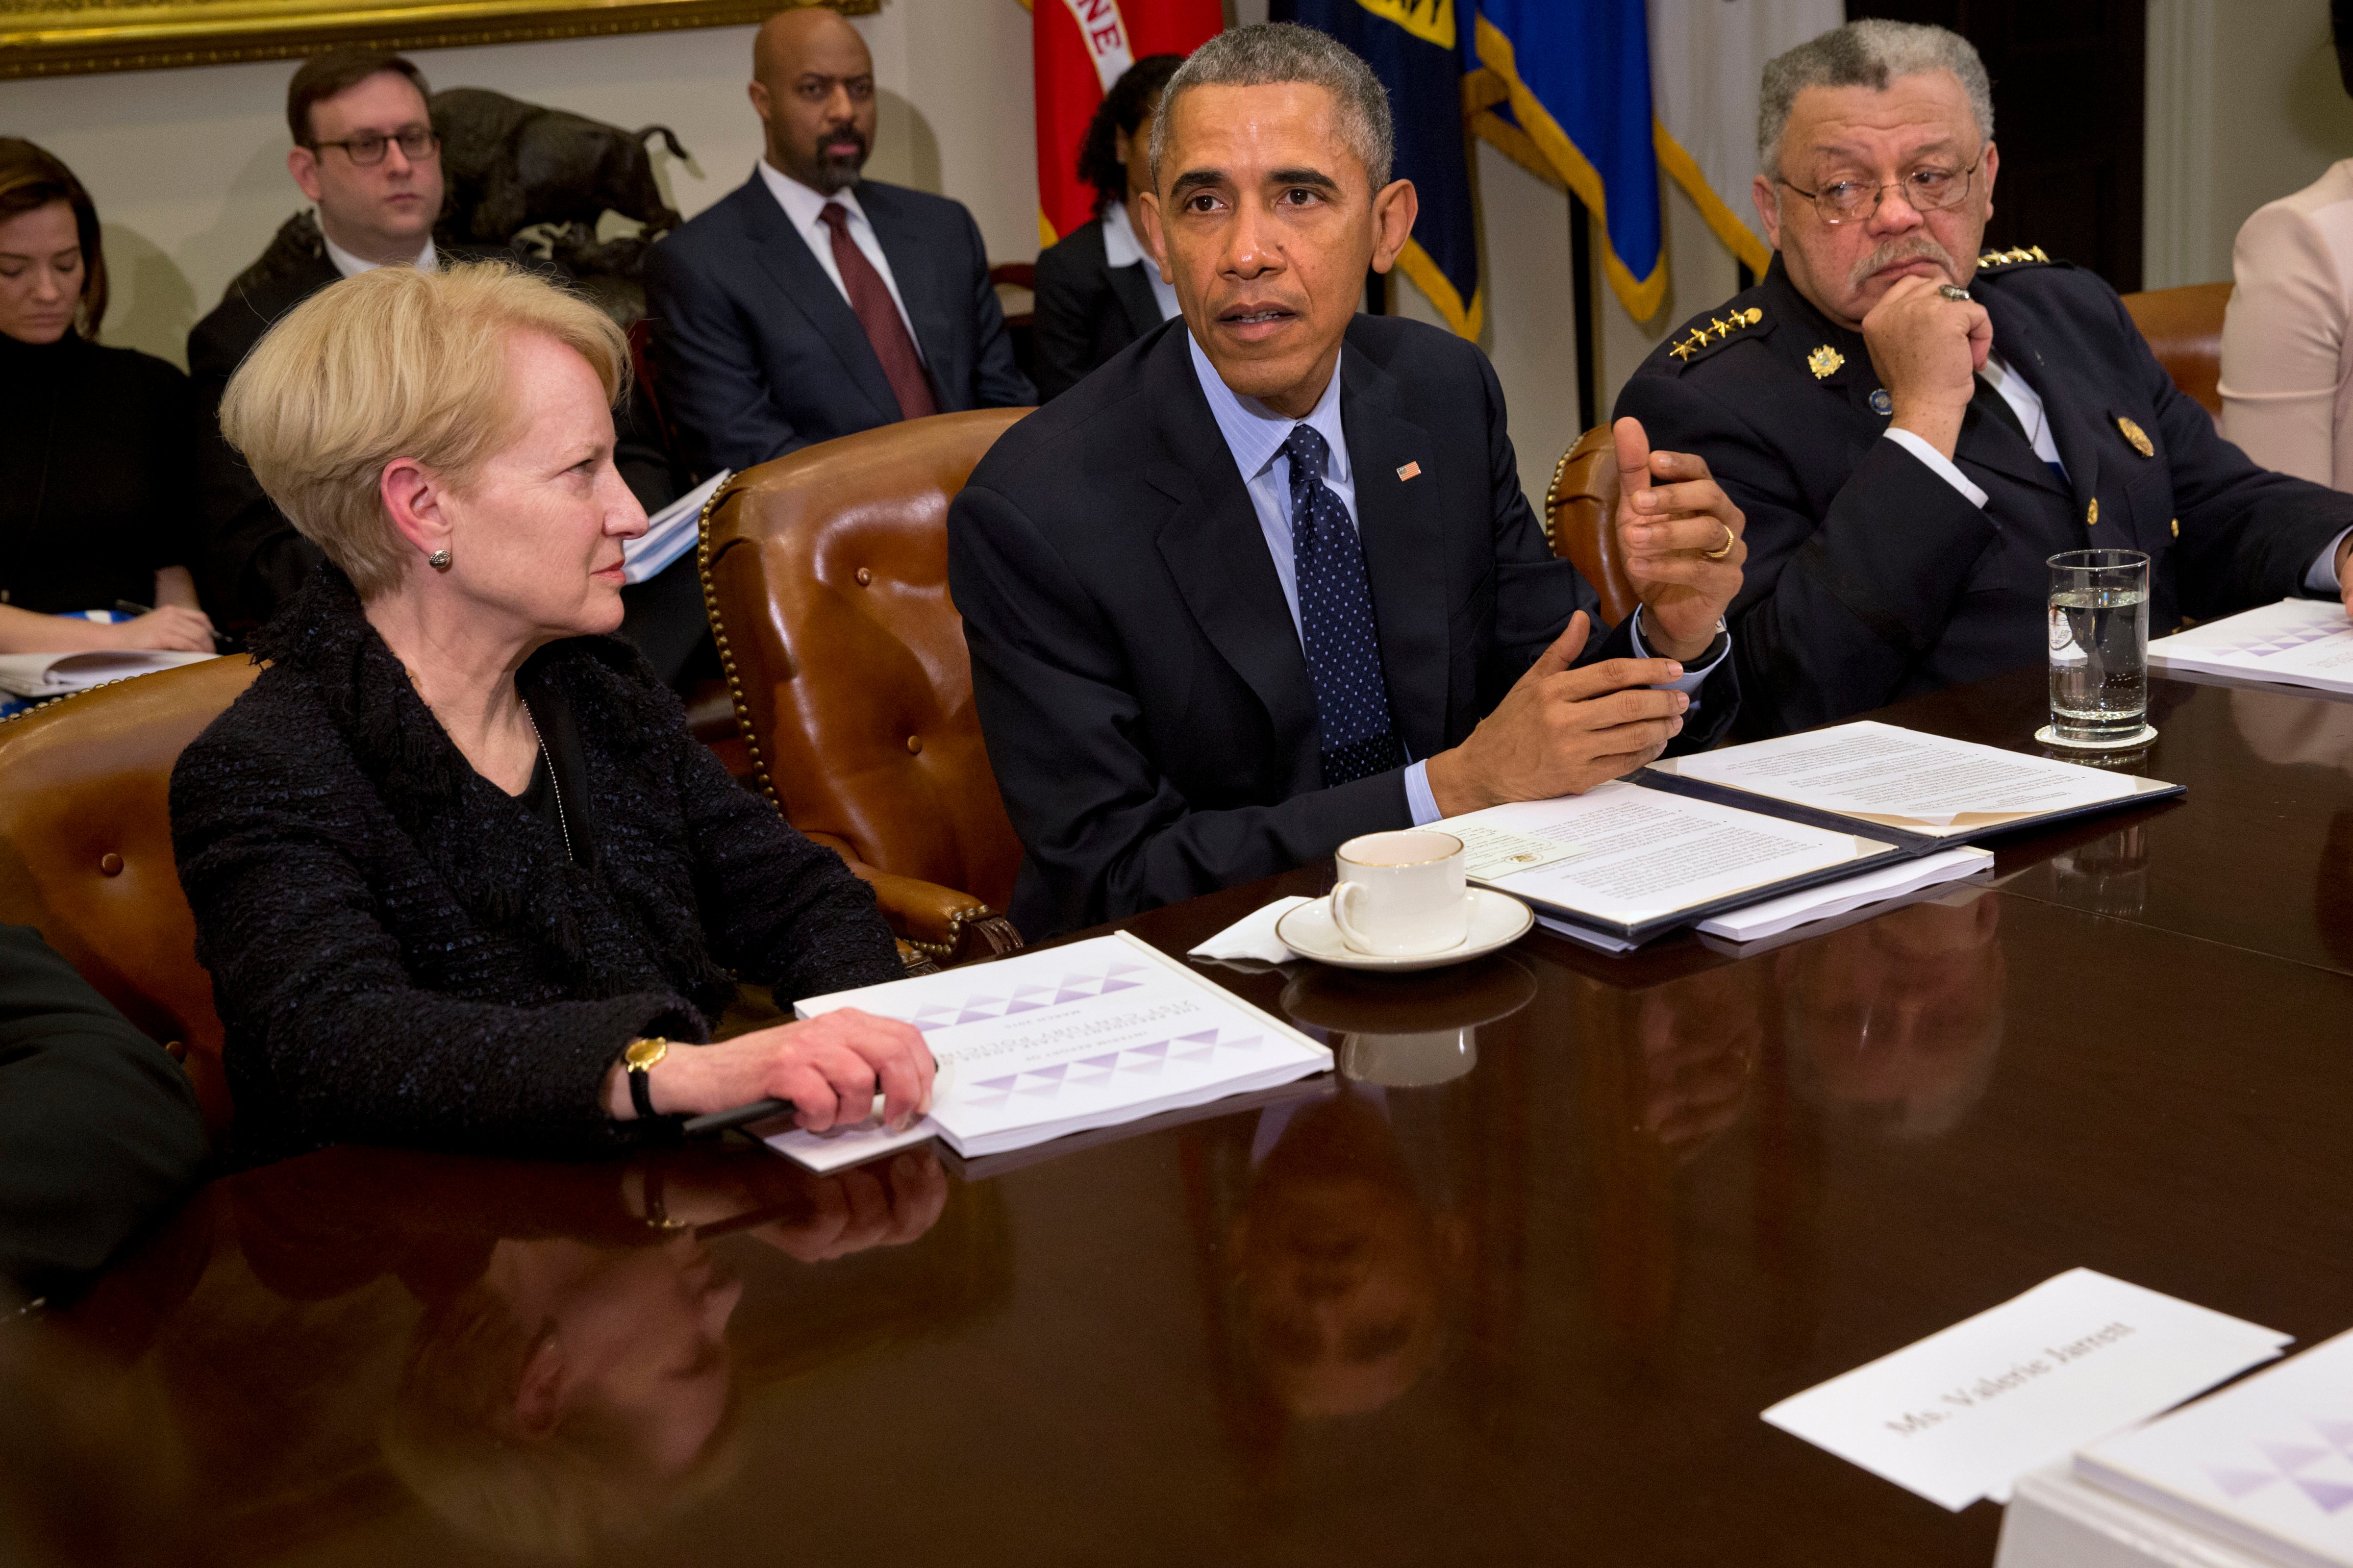 President Barack Obama, flanked by former Assistant Attorney General Laurie Robinson, left, and Philadelphia Police Commissioner Charles Ramsey, speaks during a meeting with members of the Task Force on 21st Century Policing (Jacquelyn Martin&mdash;AP)